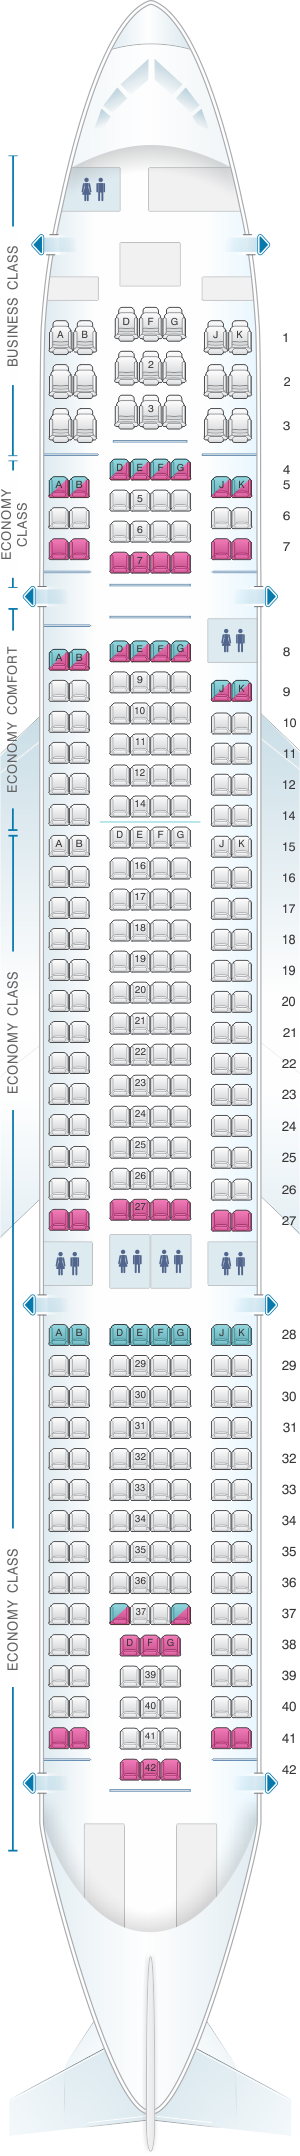 Eurowings a330-300 seatmap Airbus A330